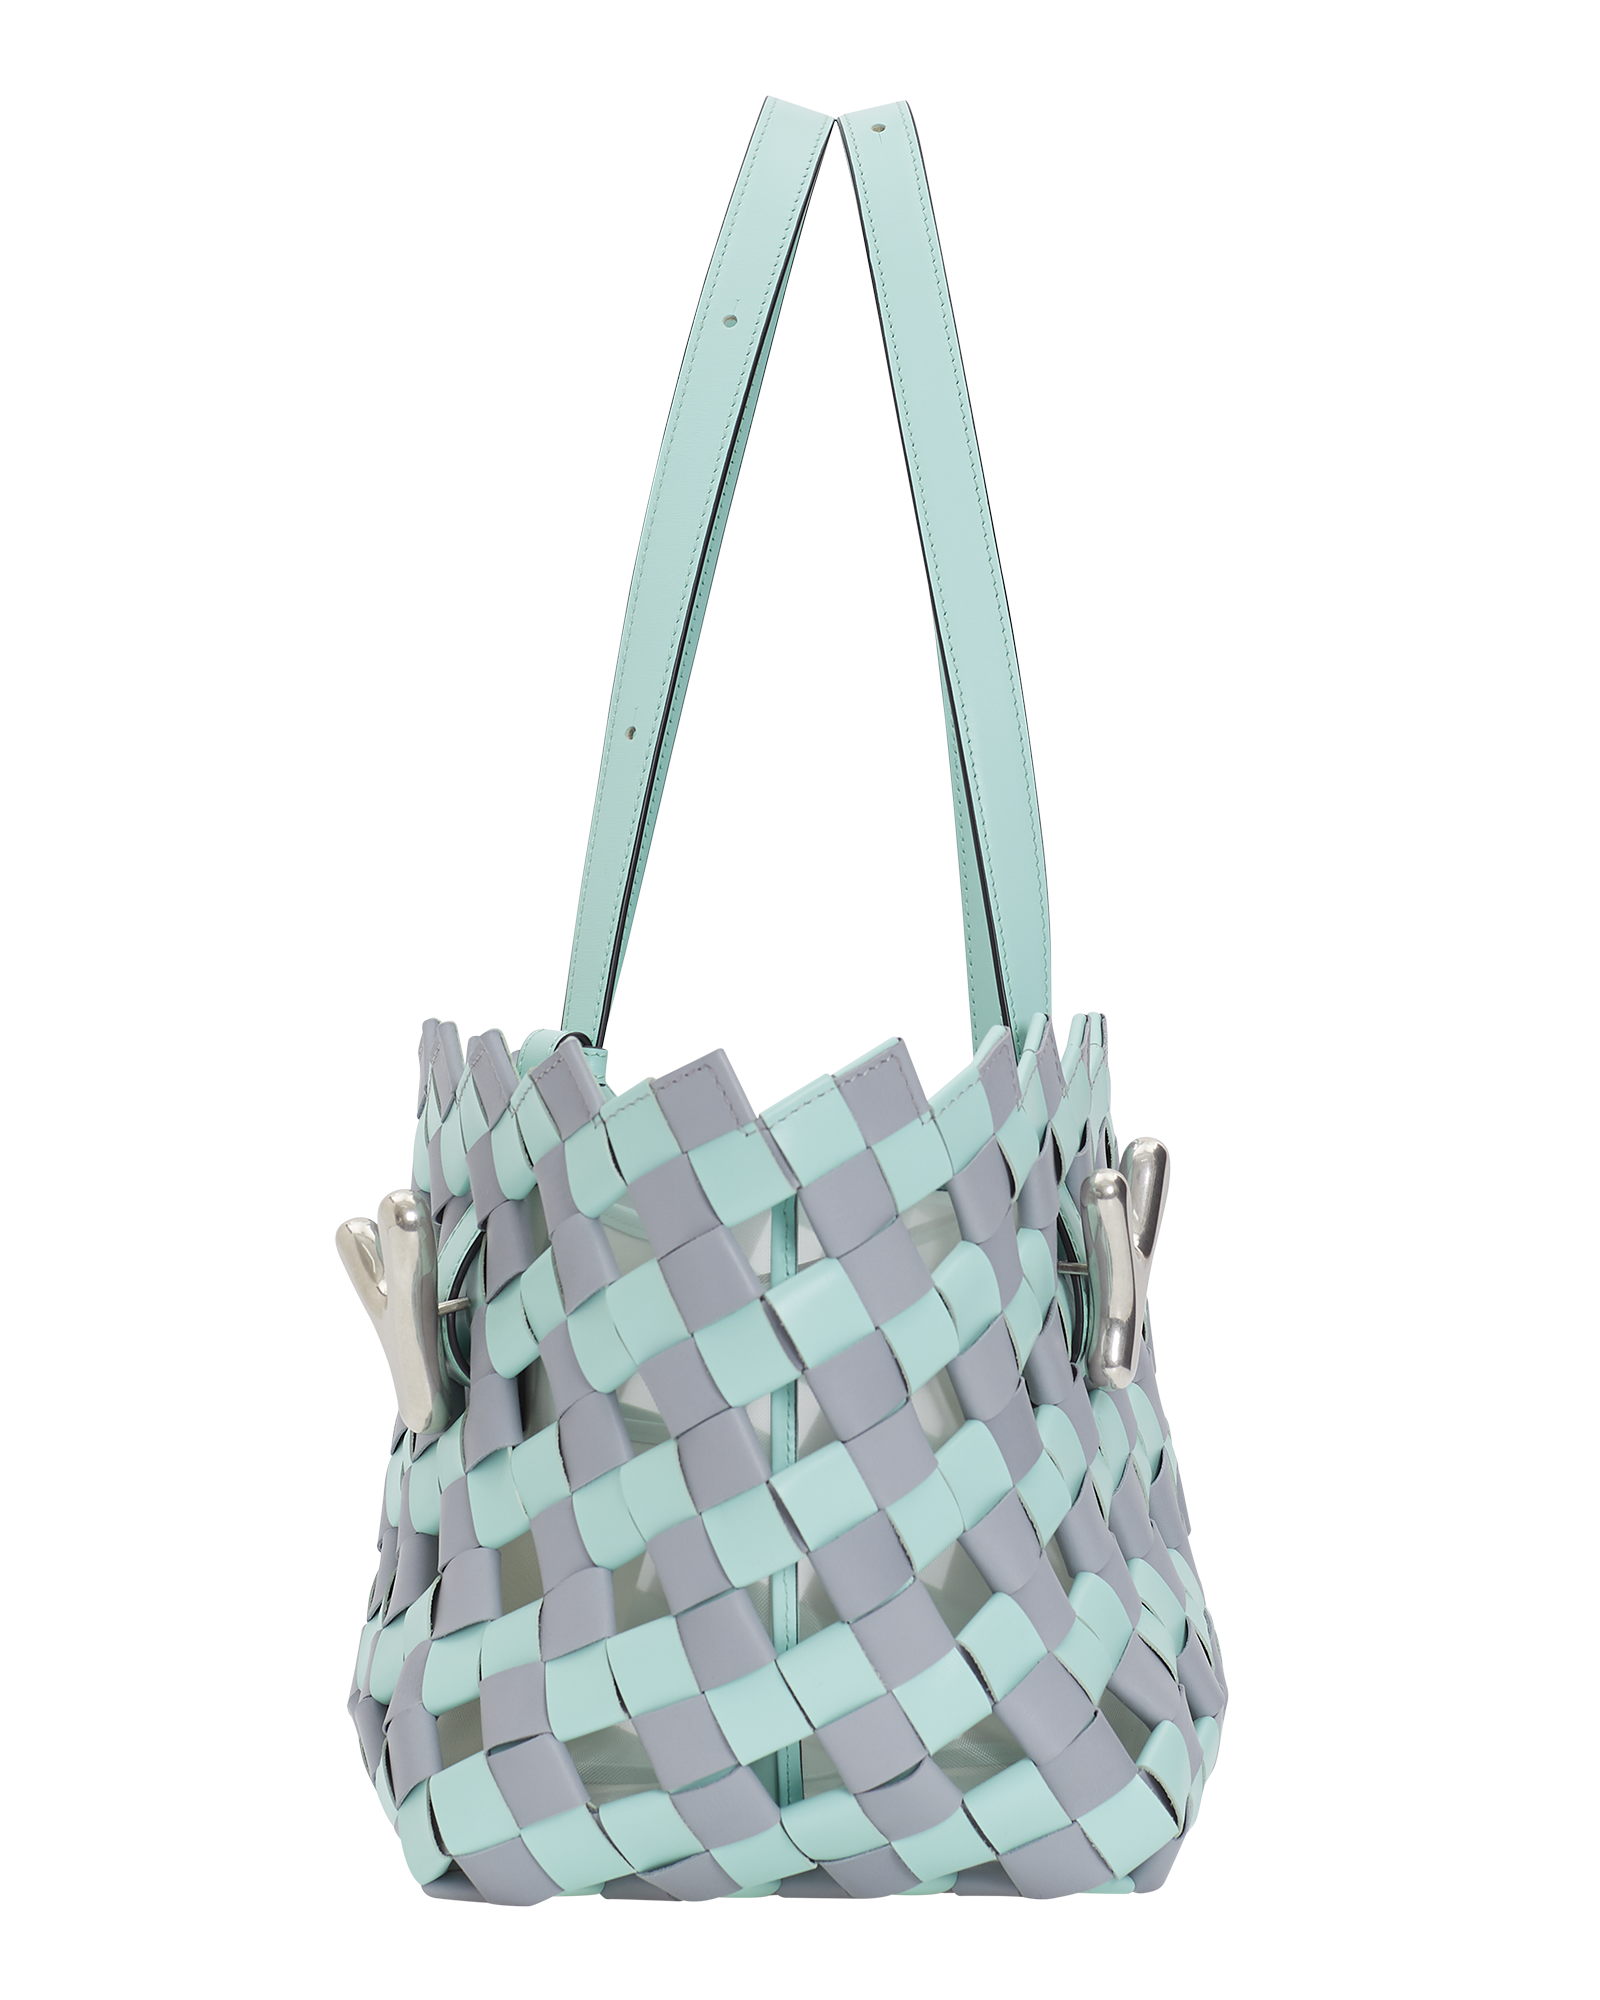 YY West 26 Woven Tote